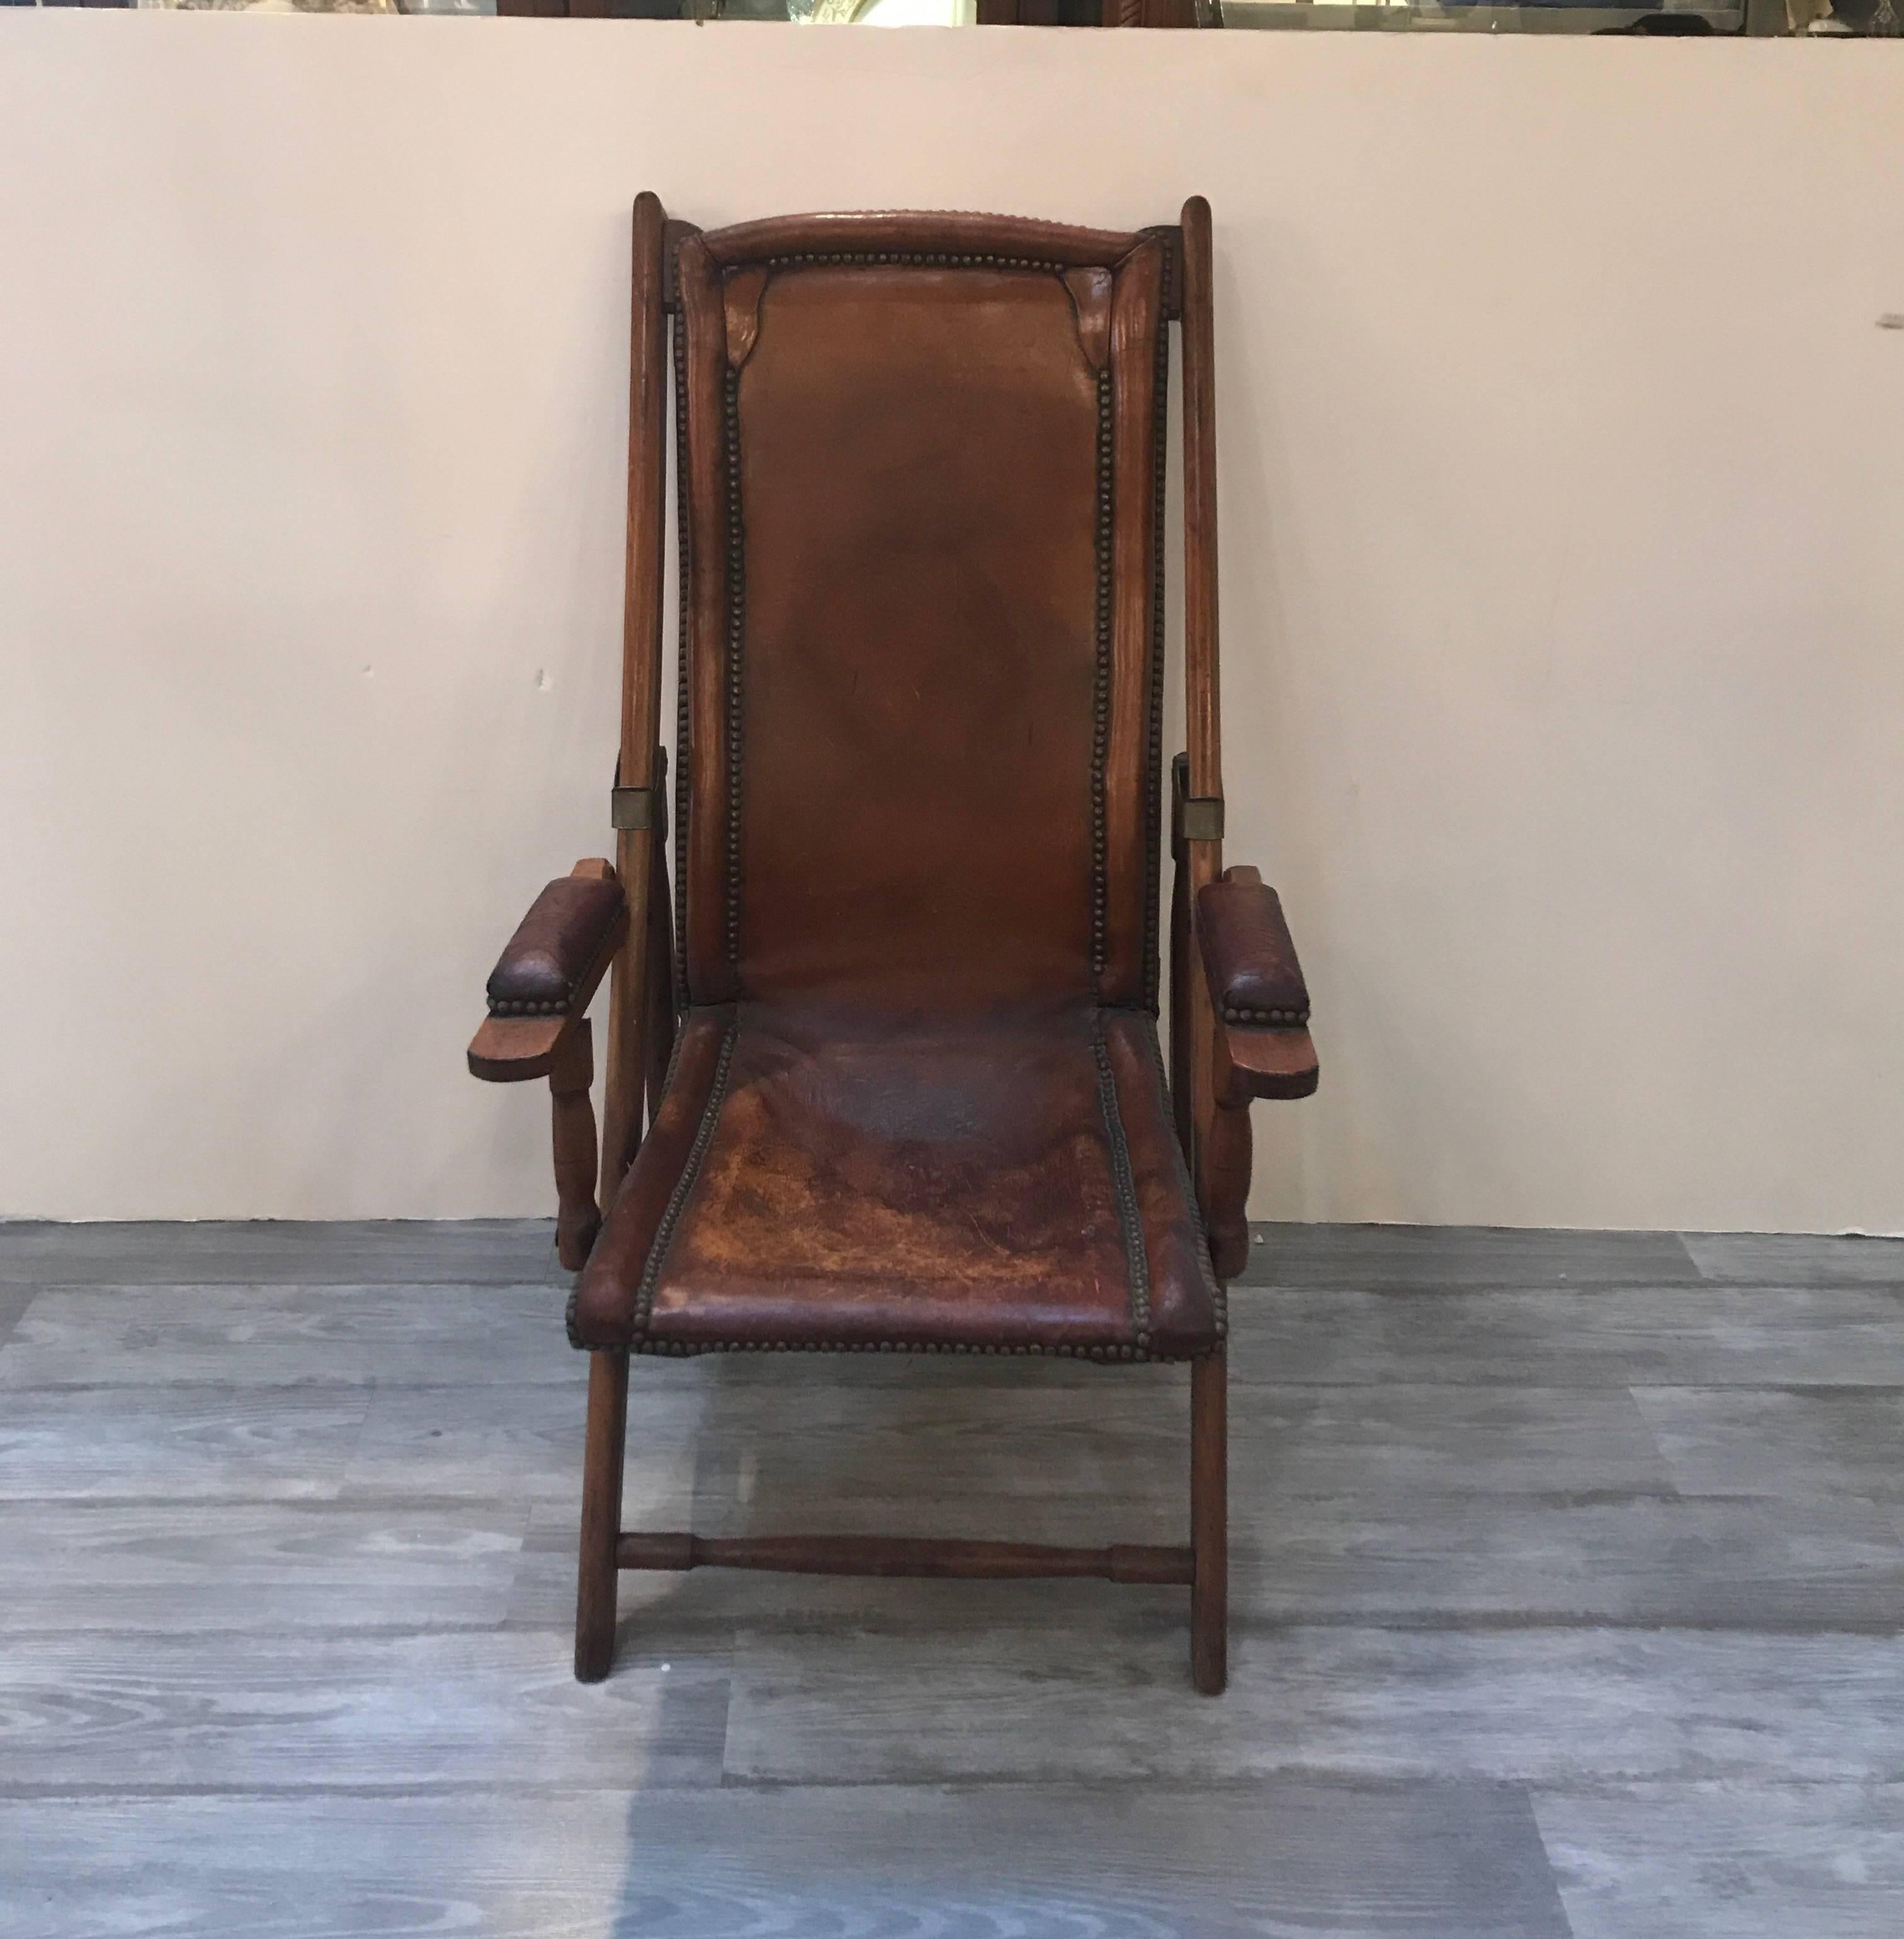 Very rare antique English campaign chair. The leather seat and back with original brass nail head trim. The medium tone mahogany frame with leather padded arm rests. The original leather is distressed like a saddle.